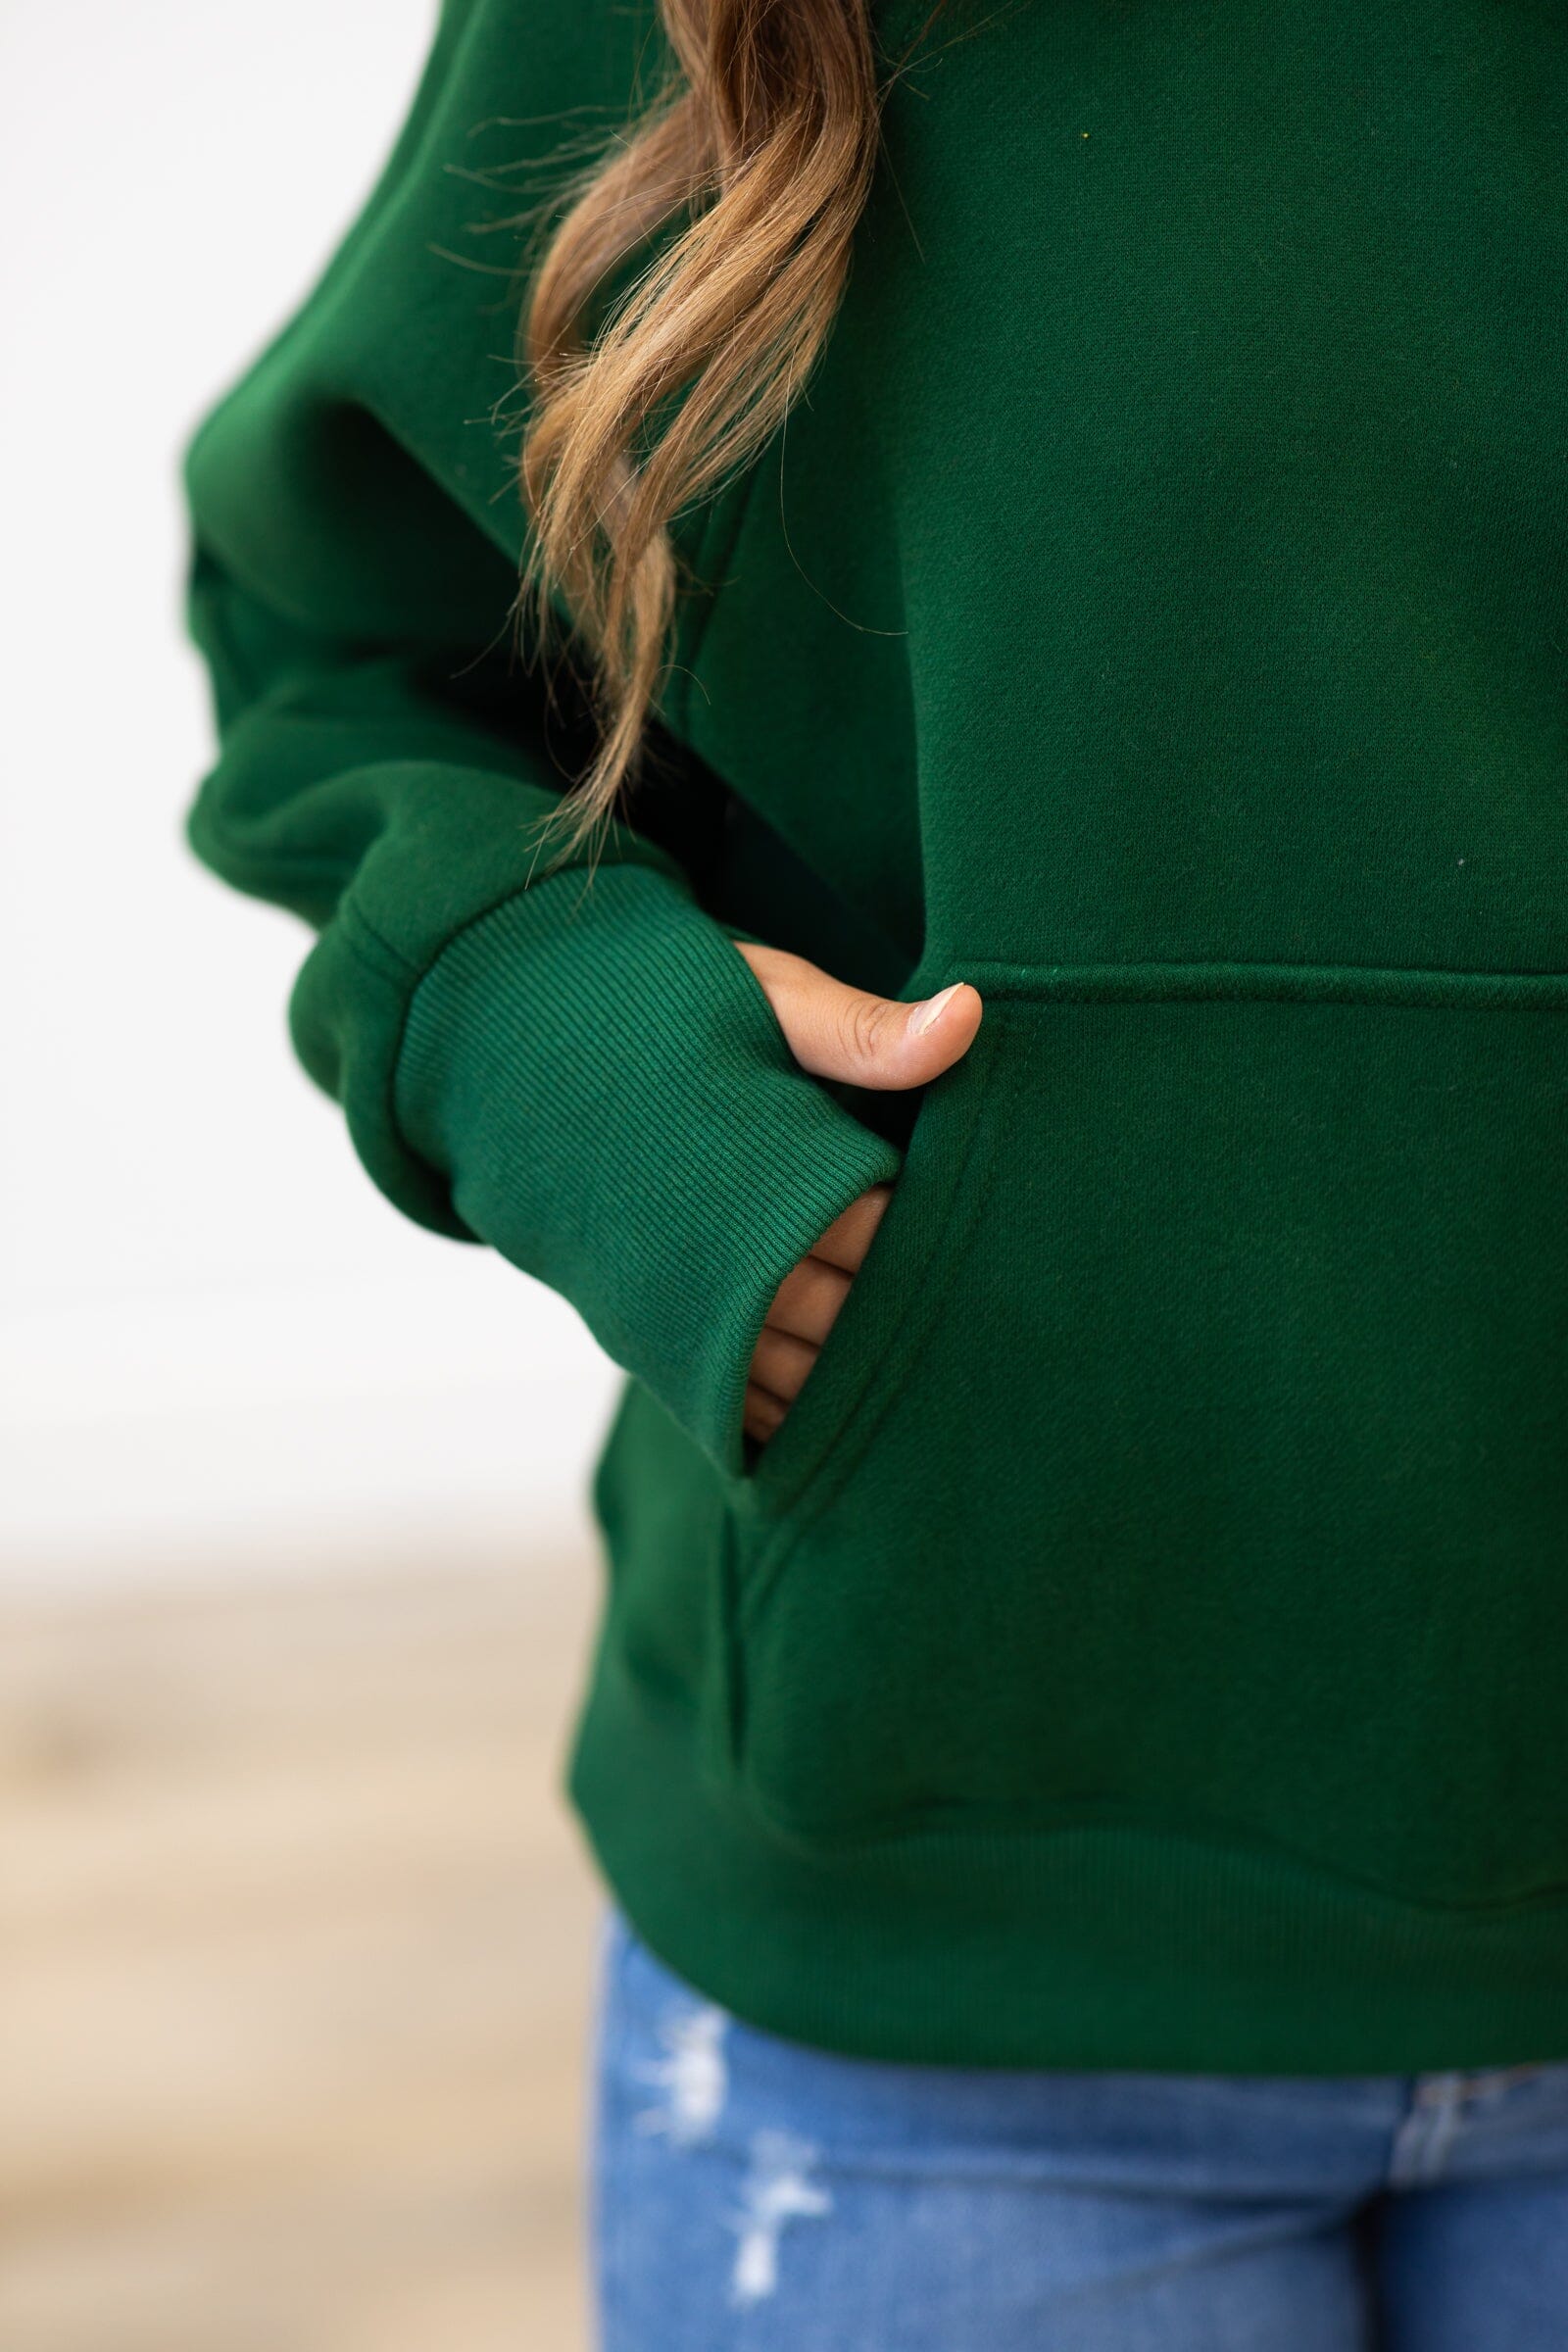 The Essential 1/2 Zip Hoodie in Hunter Green - Filly Flair